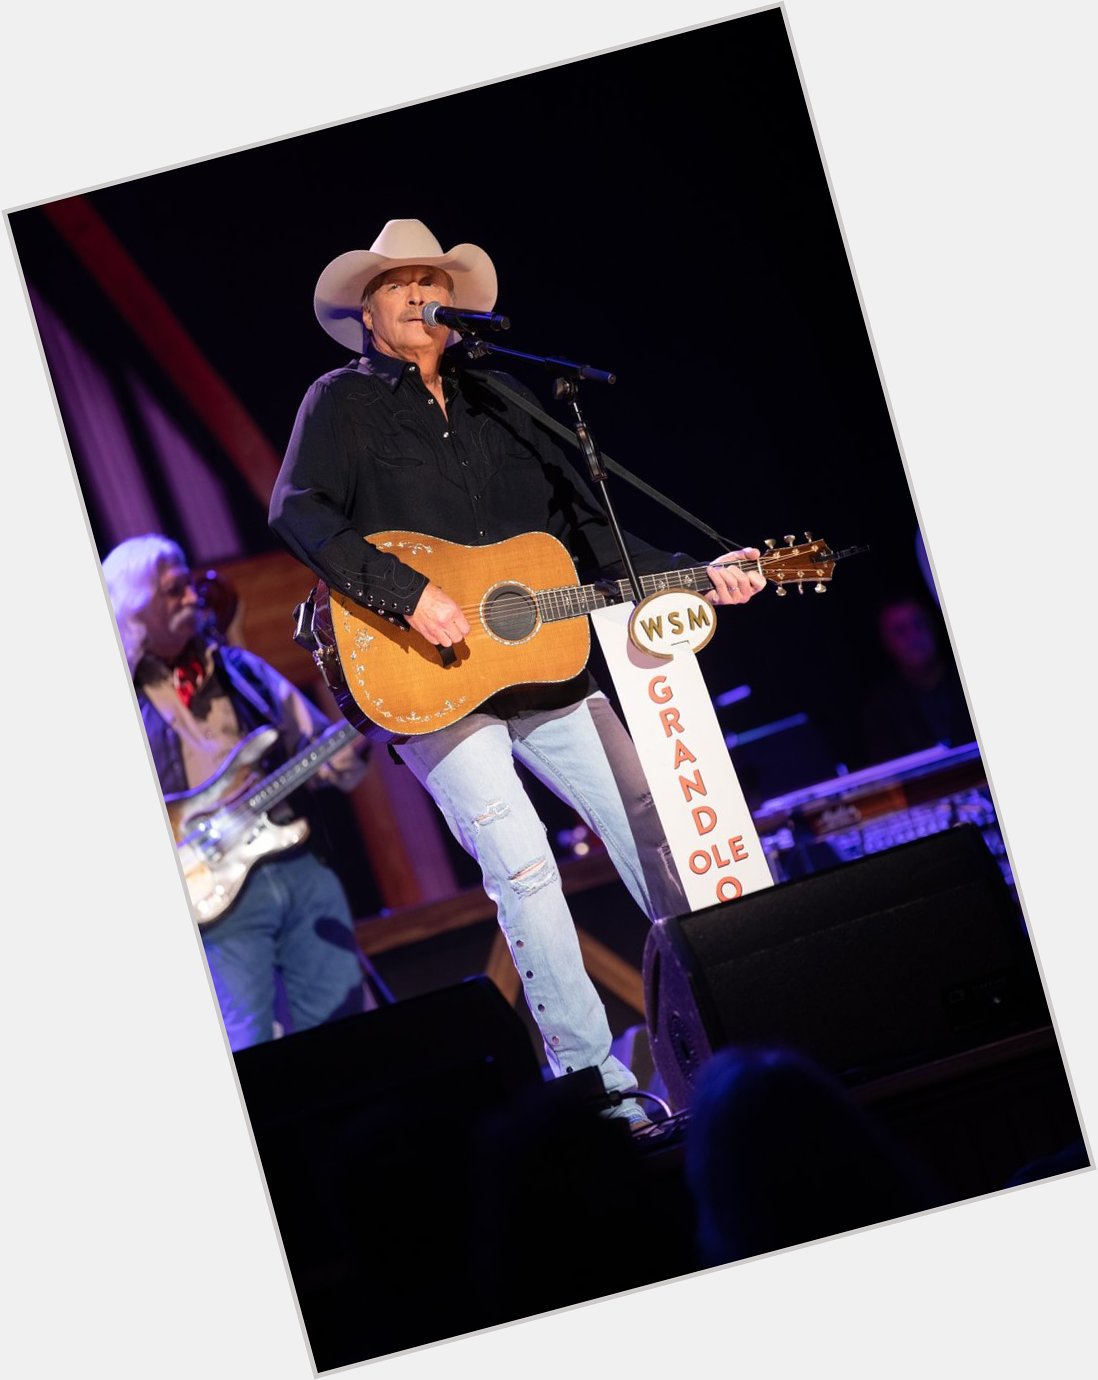 Join us in wishing Opry member Alan Jackson a very happy birthday! 